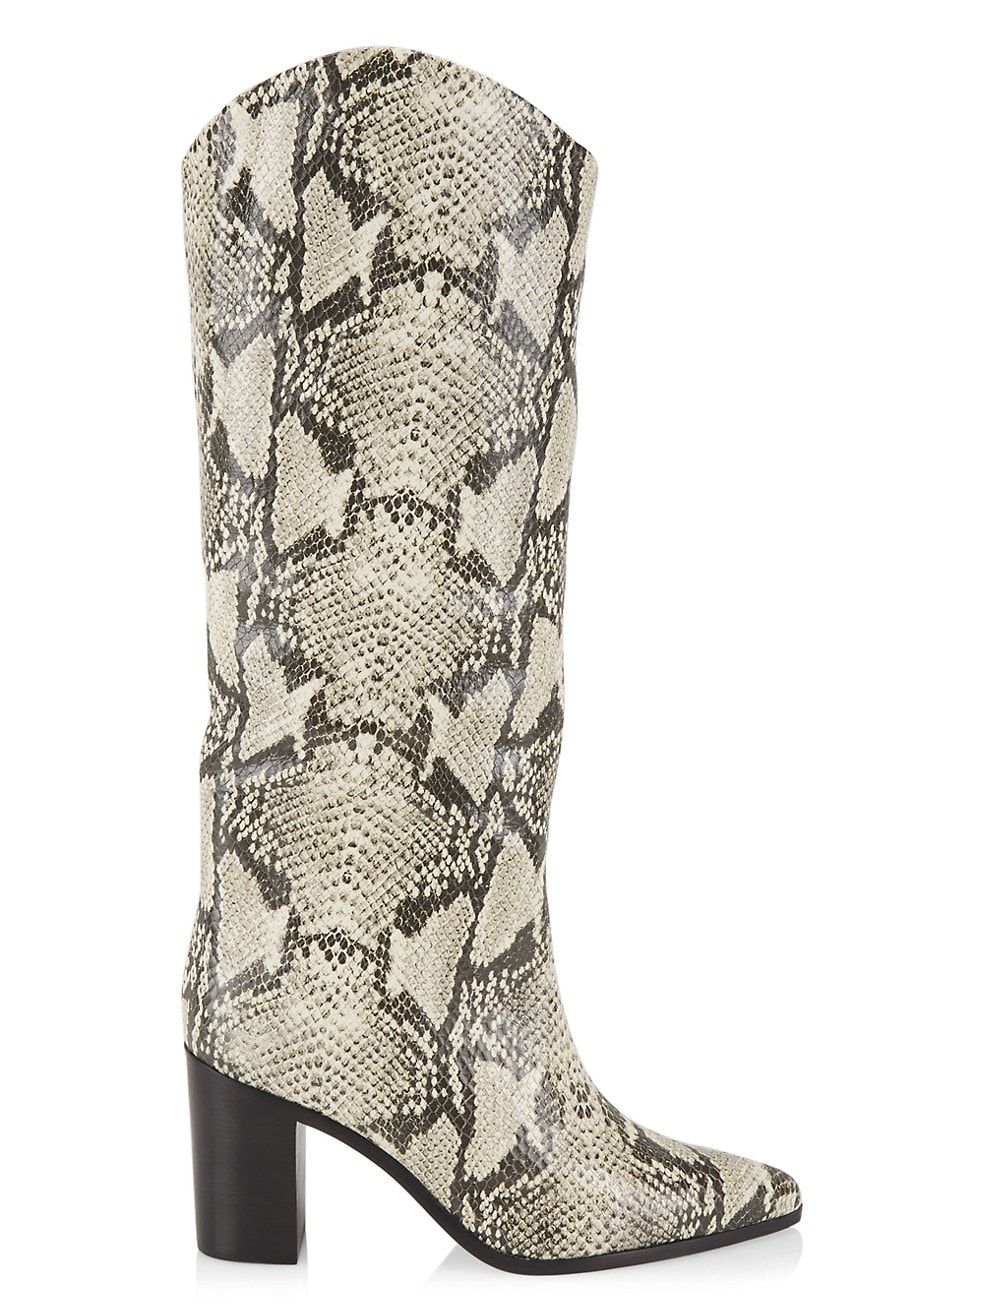 Schutz Analeah Snake-Embossed Leather Tall Boots | Saks Fifth Avenue